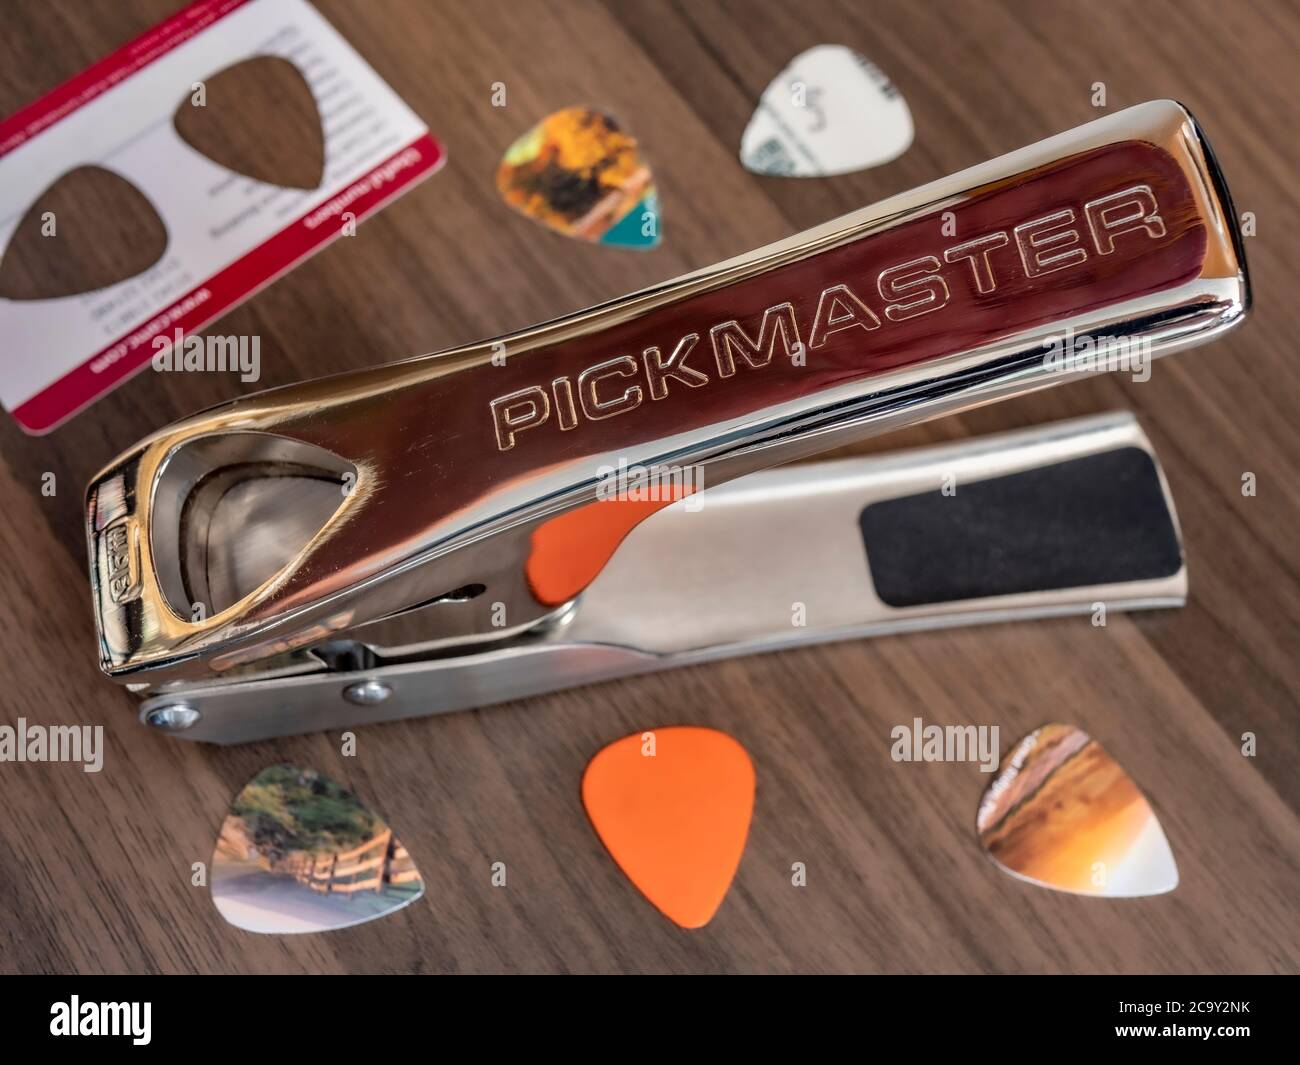 Pickmaster plectrum / pick punch for guitarists. Chrome plated steel tool  for cutting plectrums from thin plastic, eg, old credit / membership cards  Stock Photo - Alamy